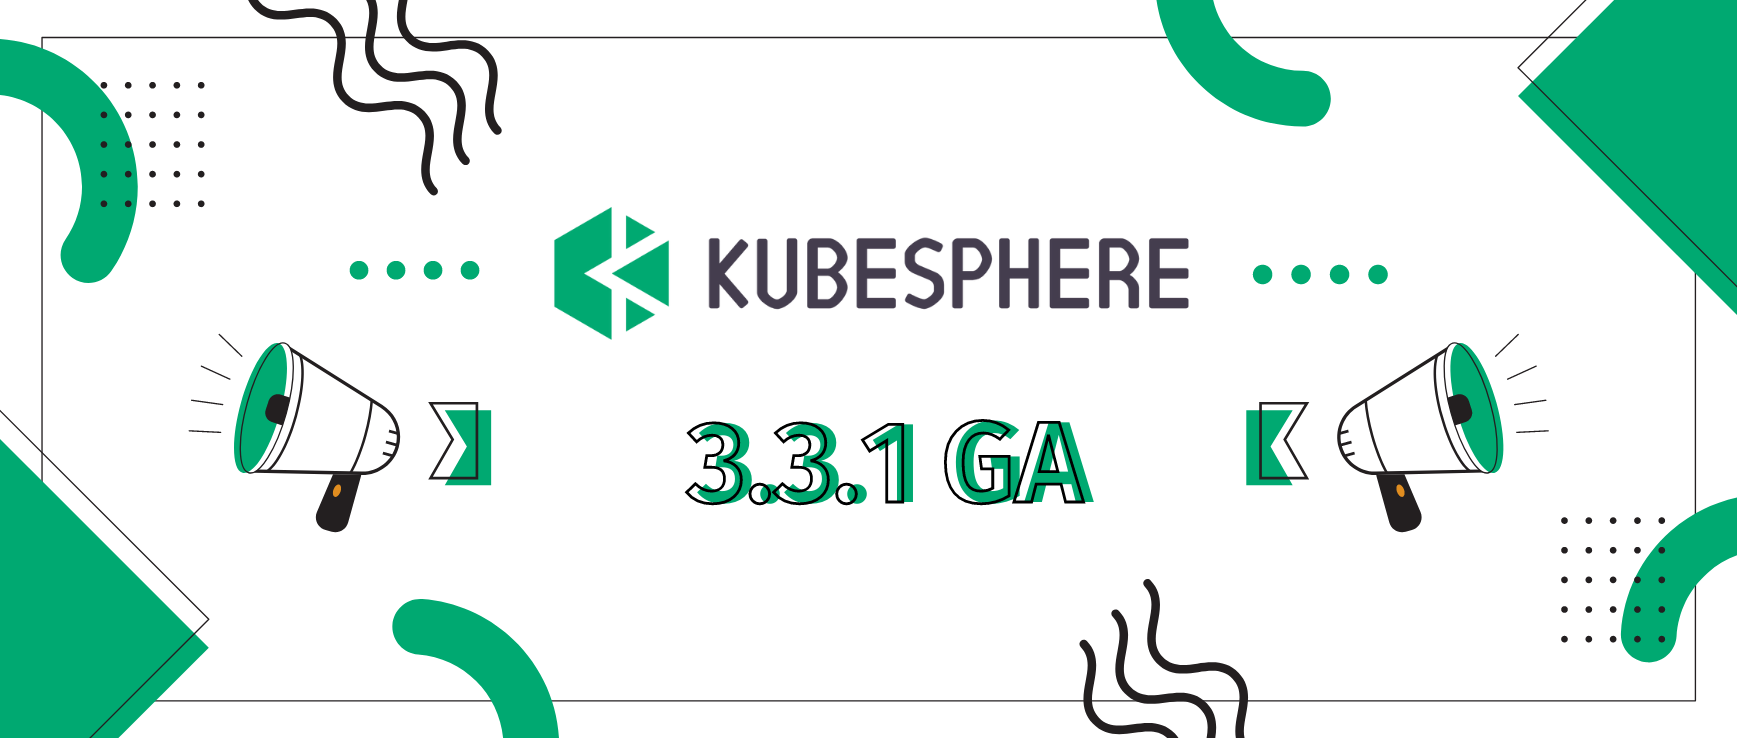 KubeSphere 3.3.1 is now generally available